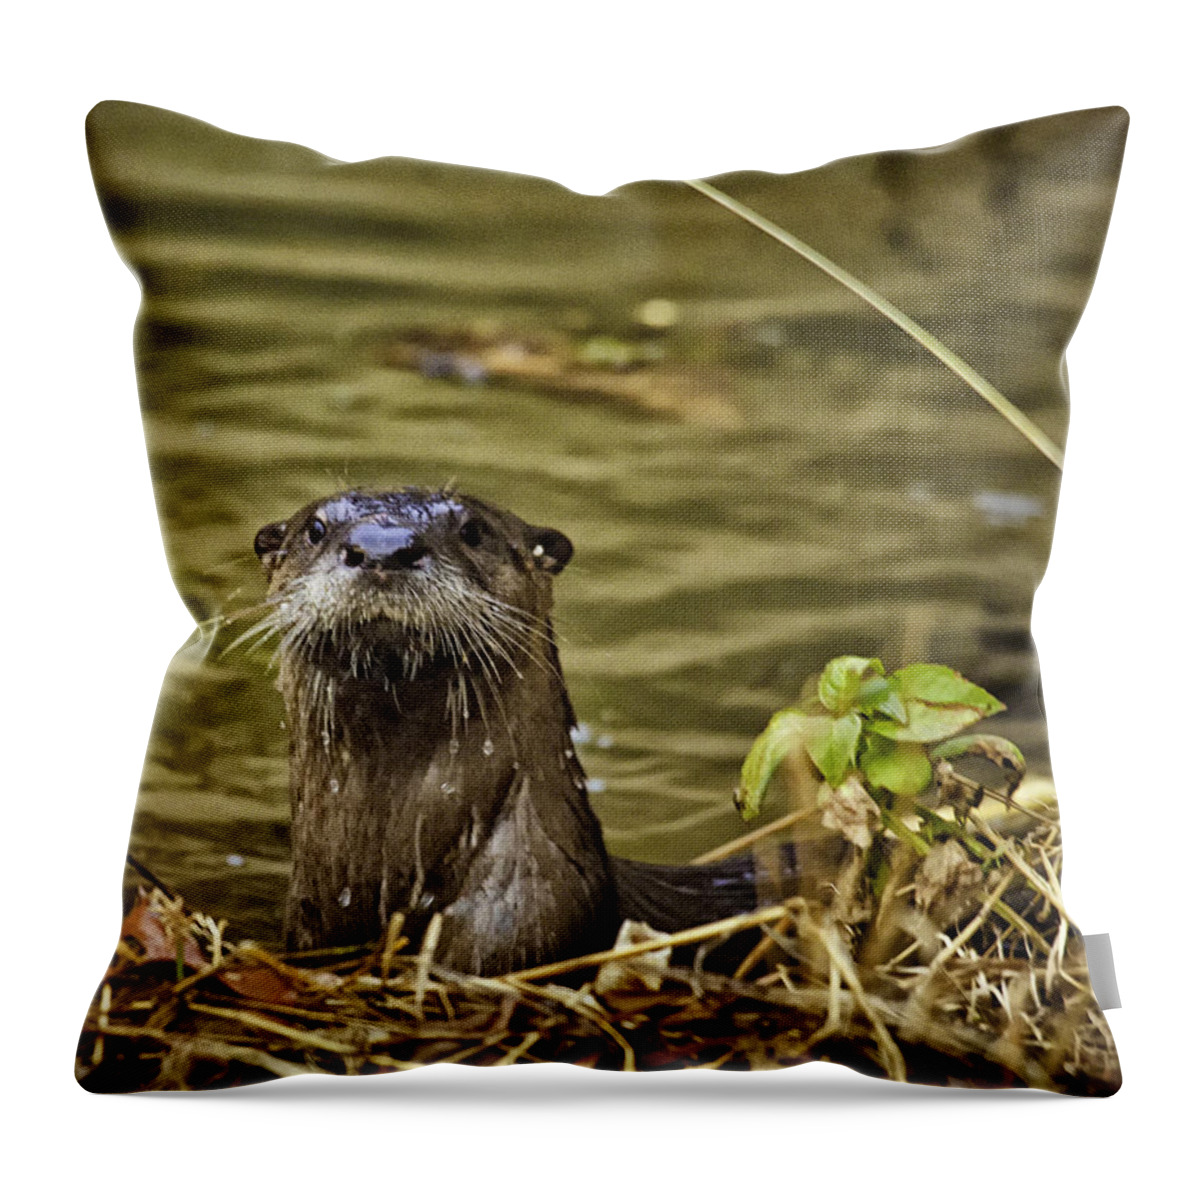 Otter Throw Pillow featuring the photograph Buffalo National River Otter by Michael Dougherty